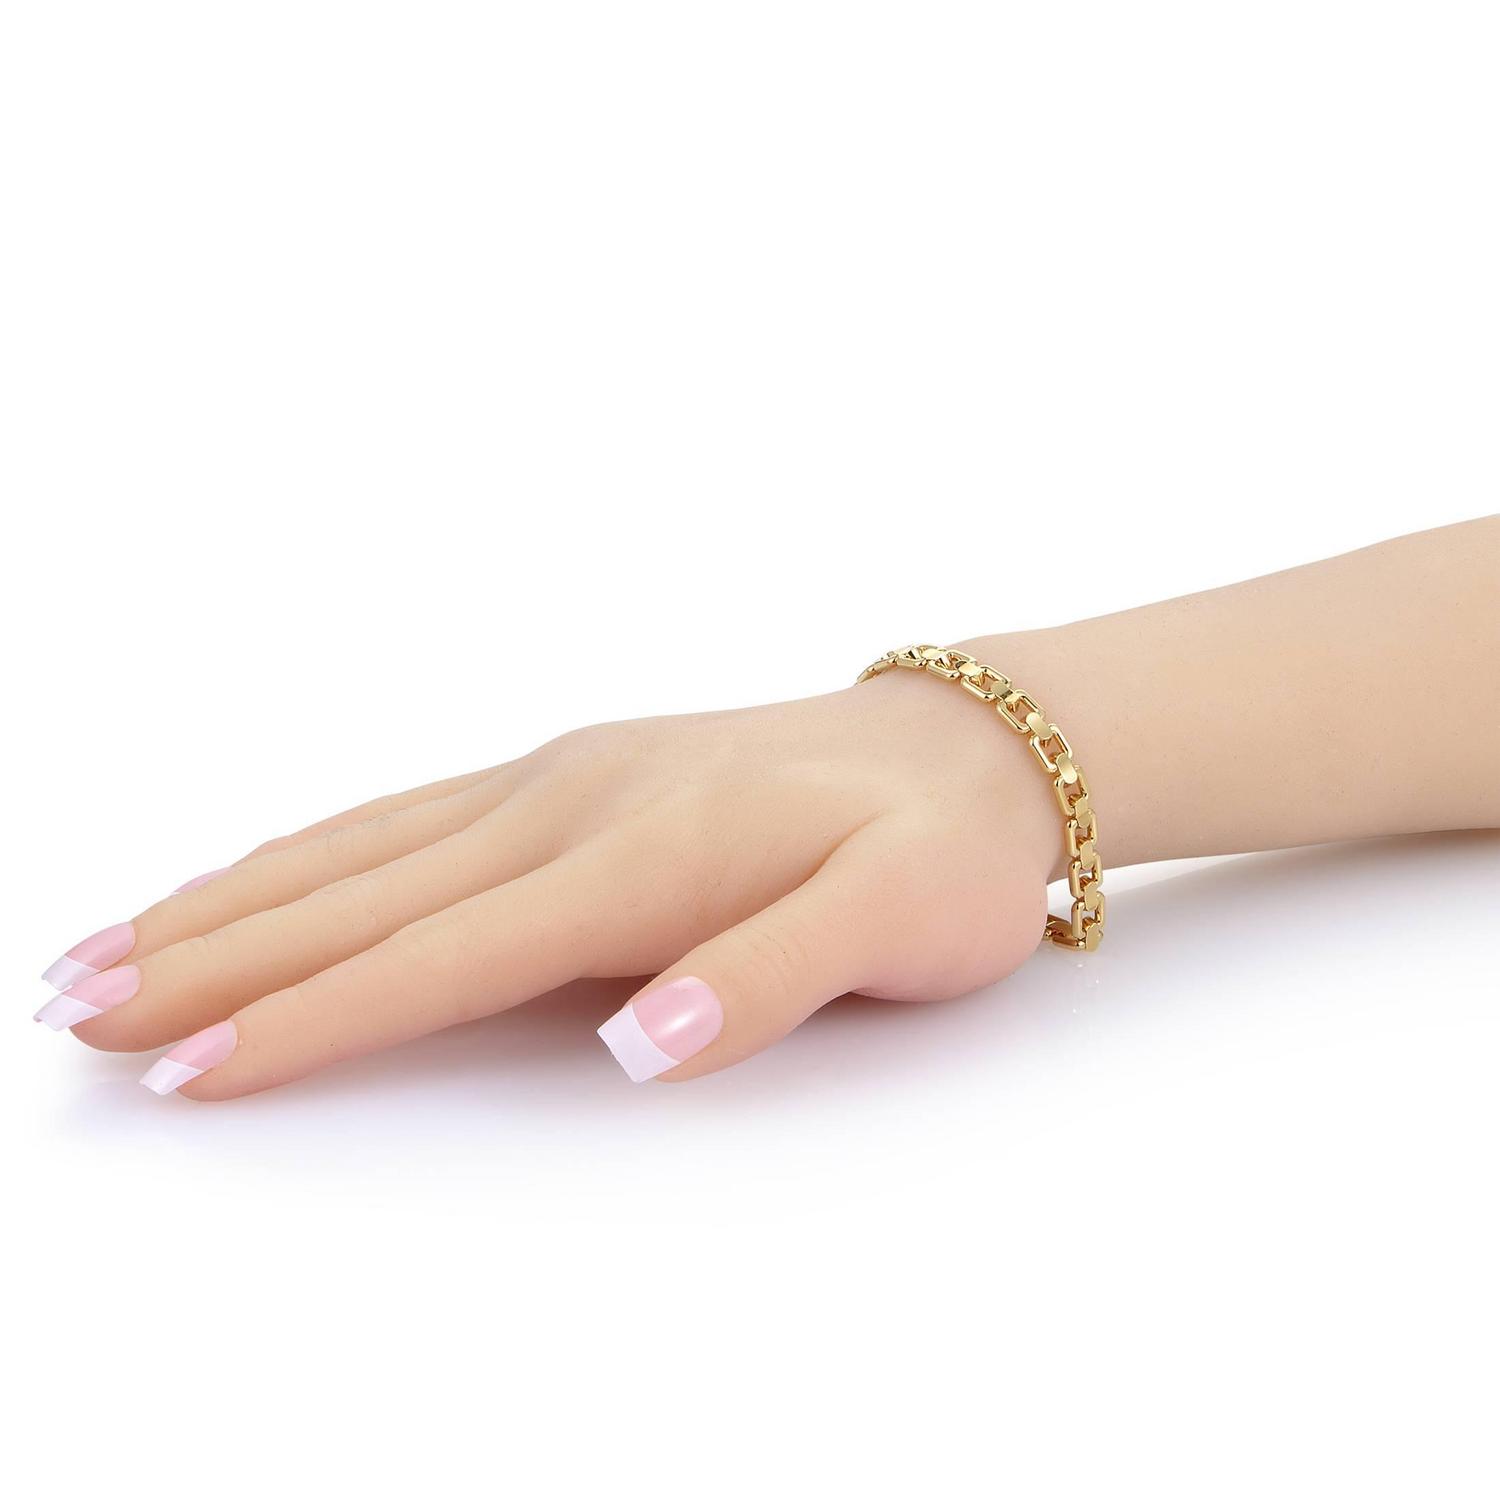 Louis Vuitton Yellow Gold Chain Link Bracelet For Sale at 1stdibs